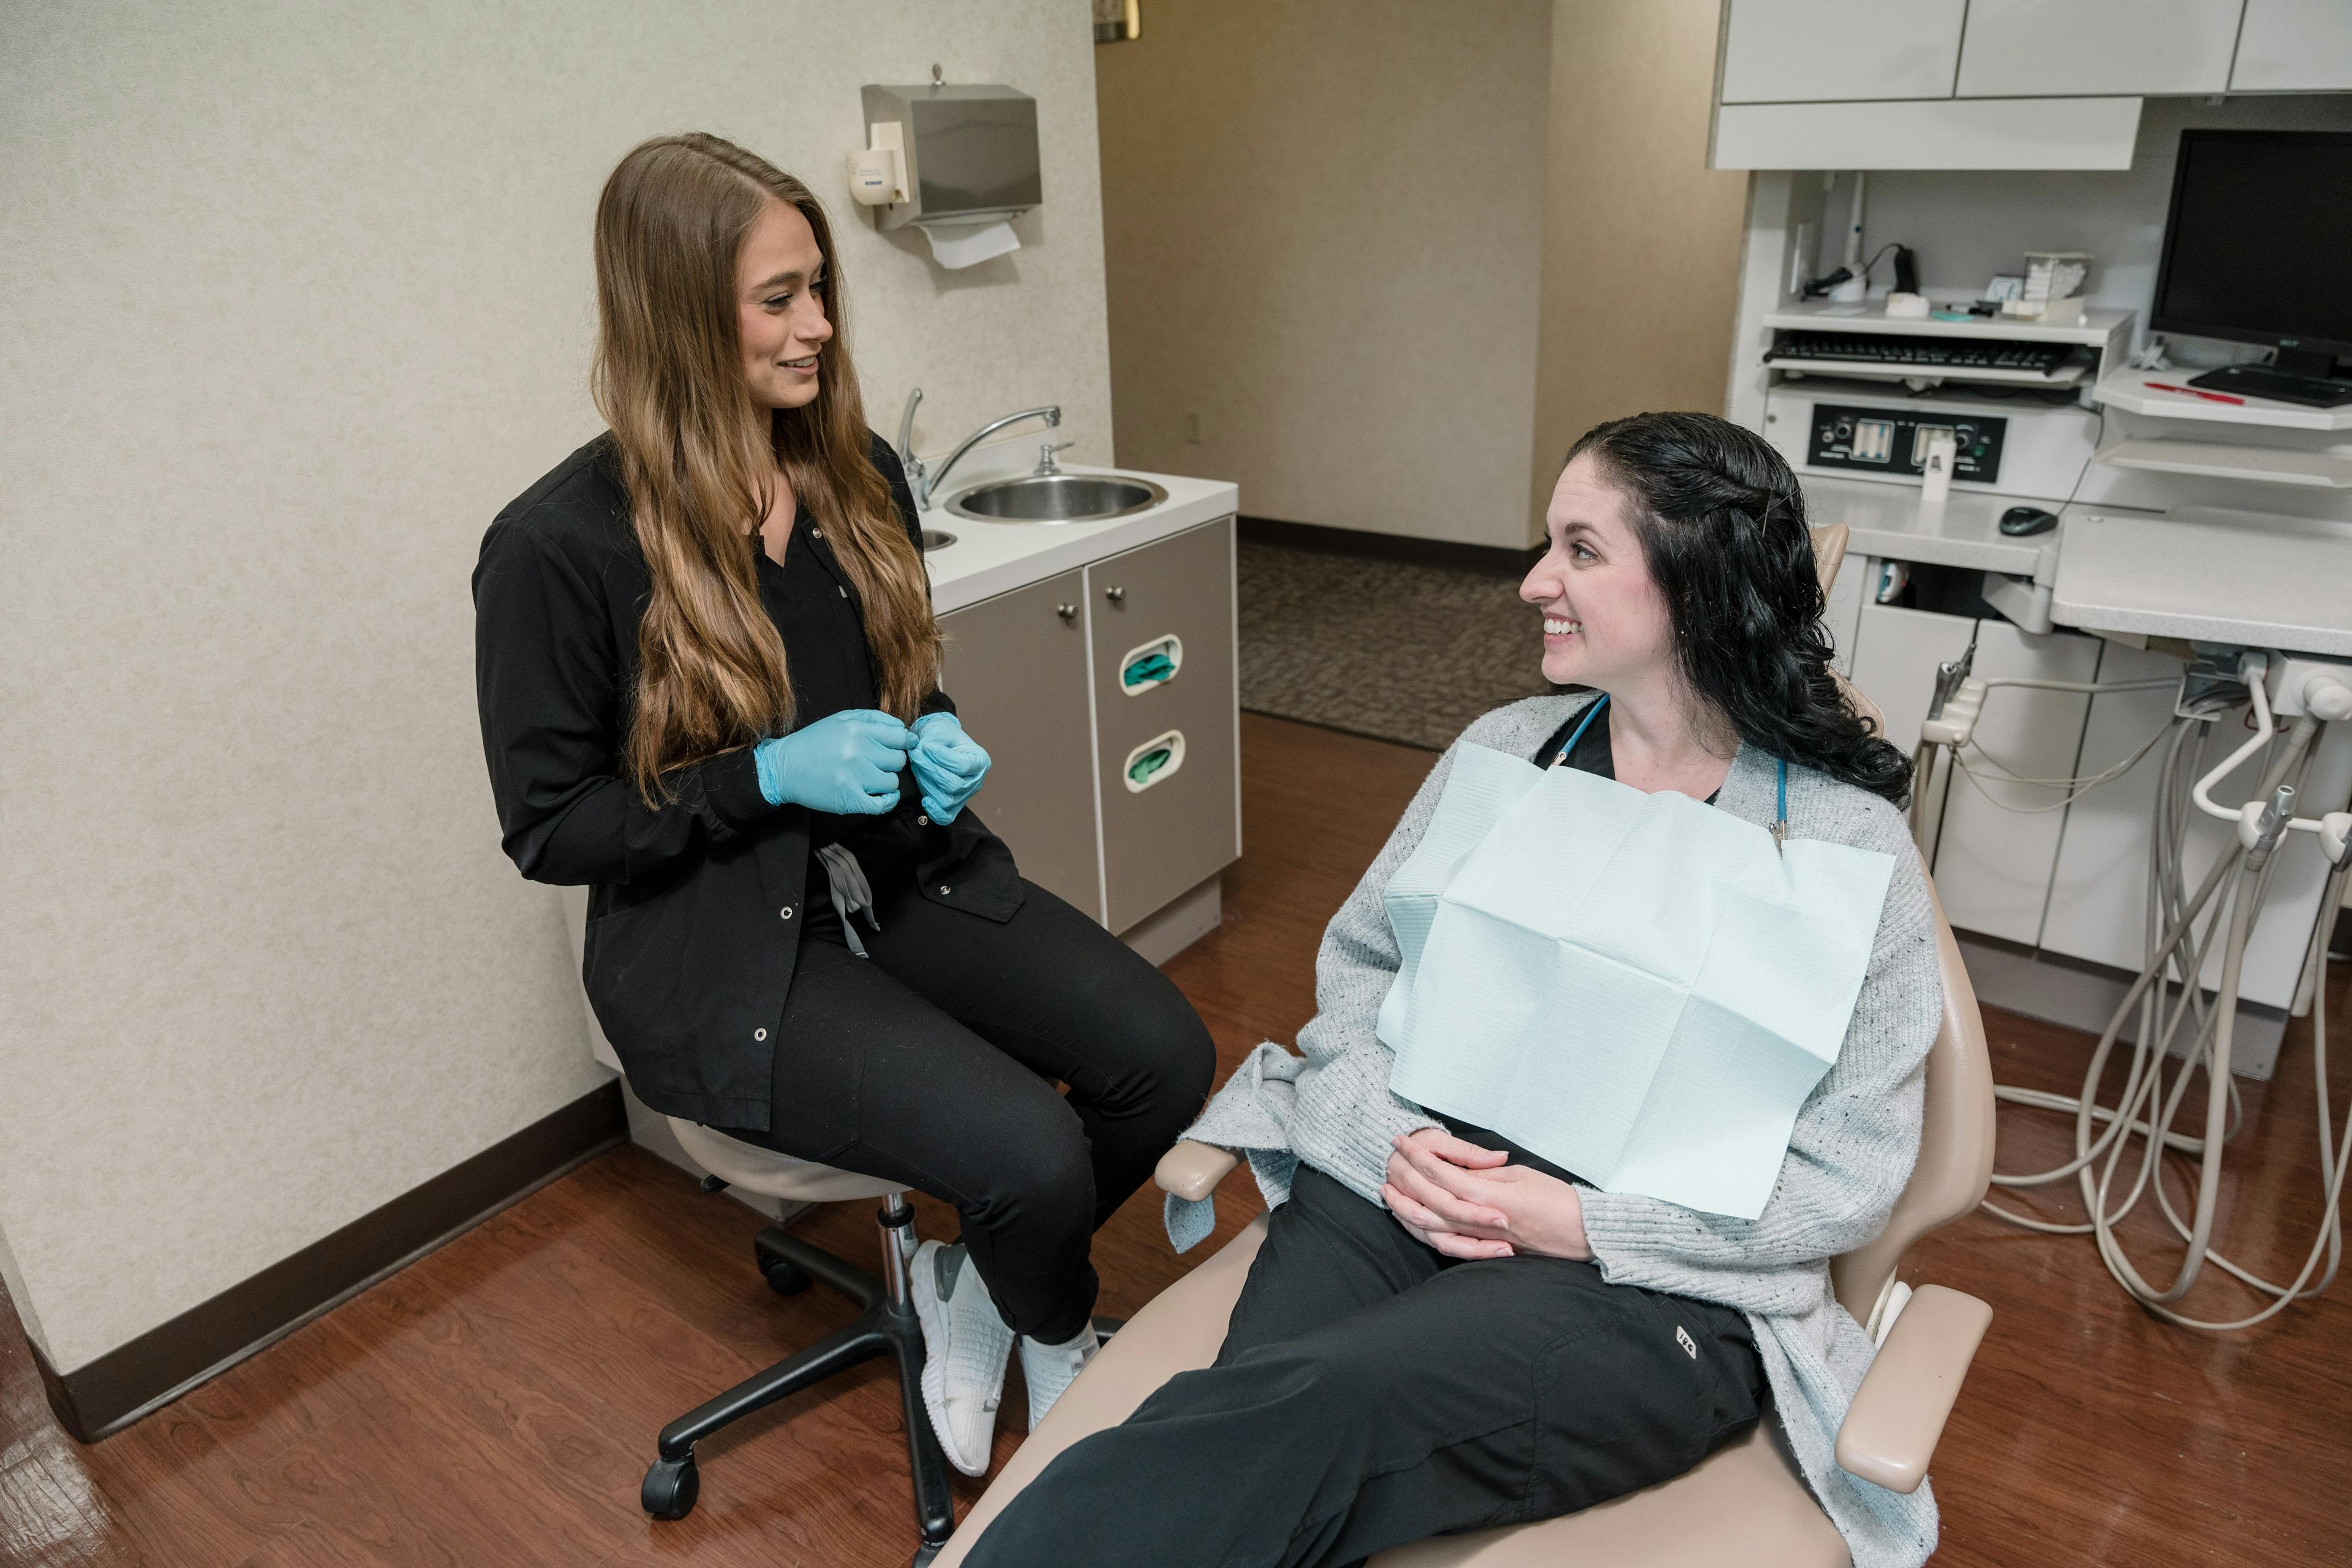 Smiling dental professional conducting a comprehensive initial exam, reflecting our commitment to quality care at Noblesville Family Dental.